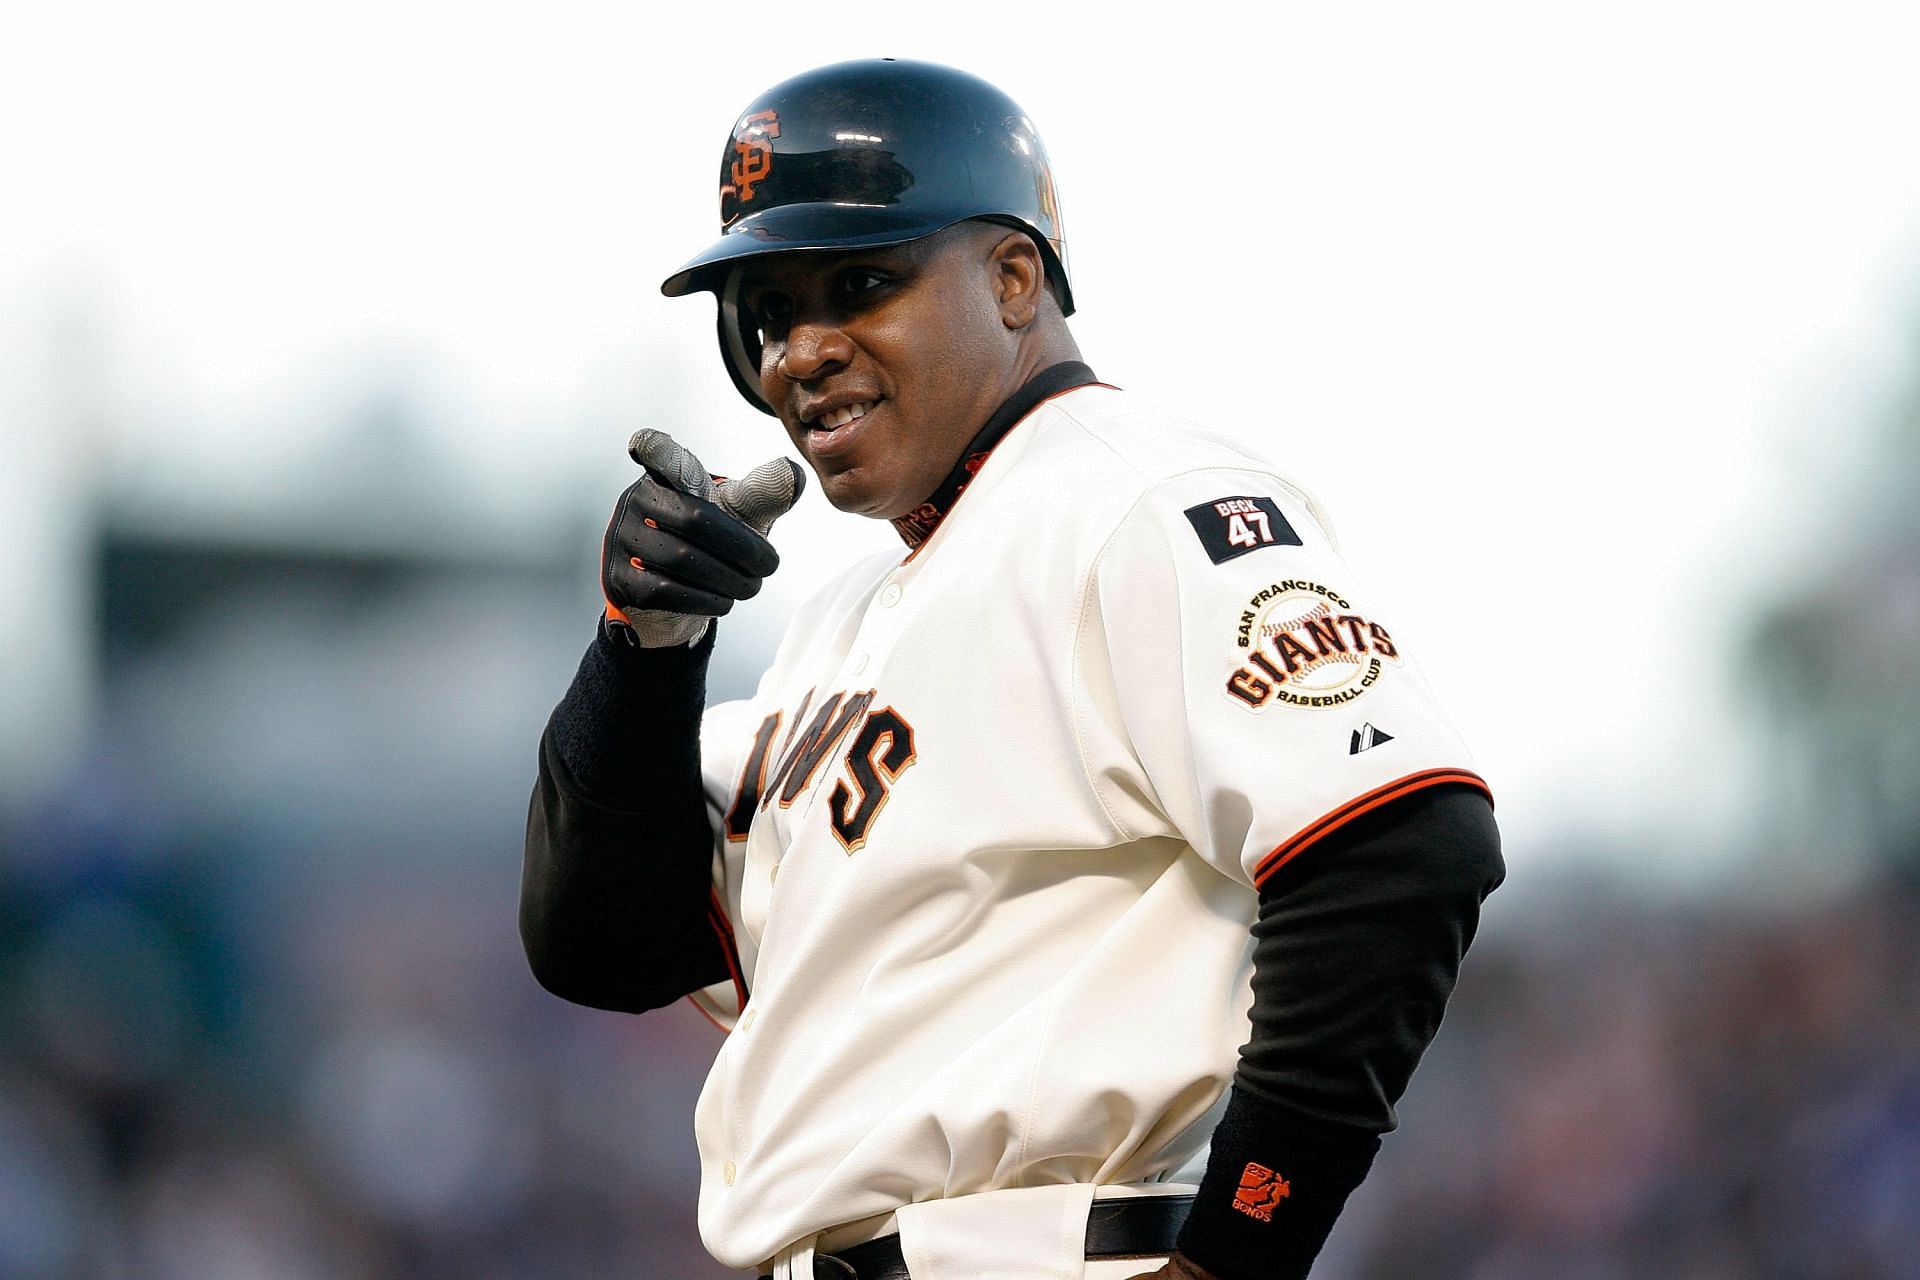 Barry Bonds absolutely MASHING home runs with the Giants! 